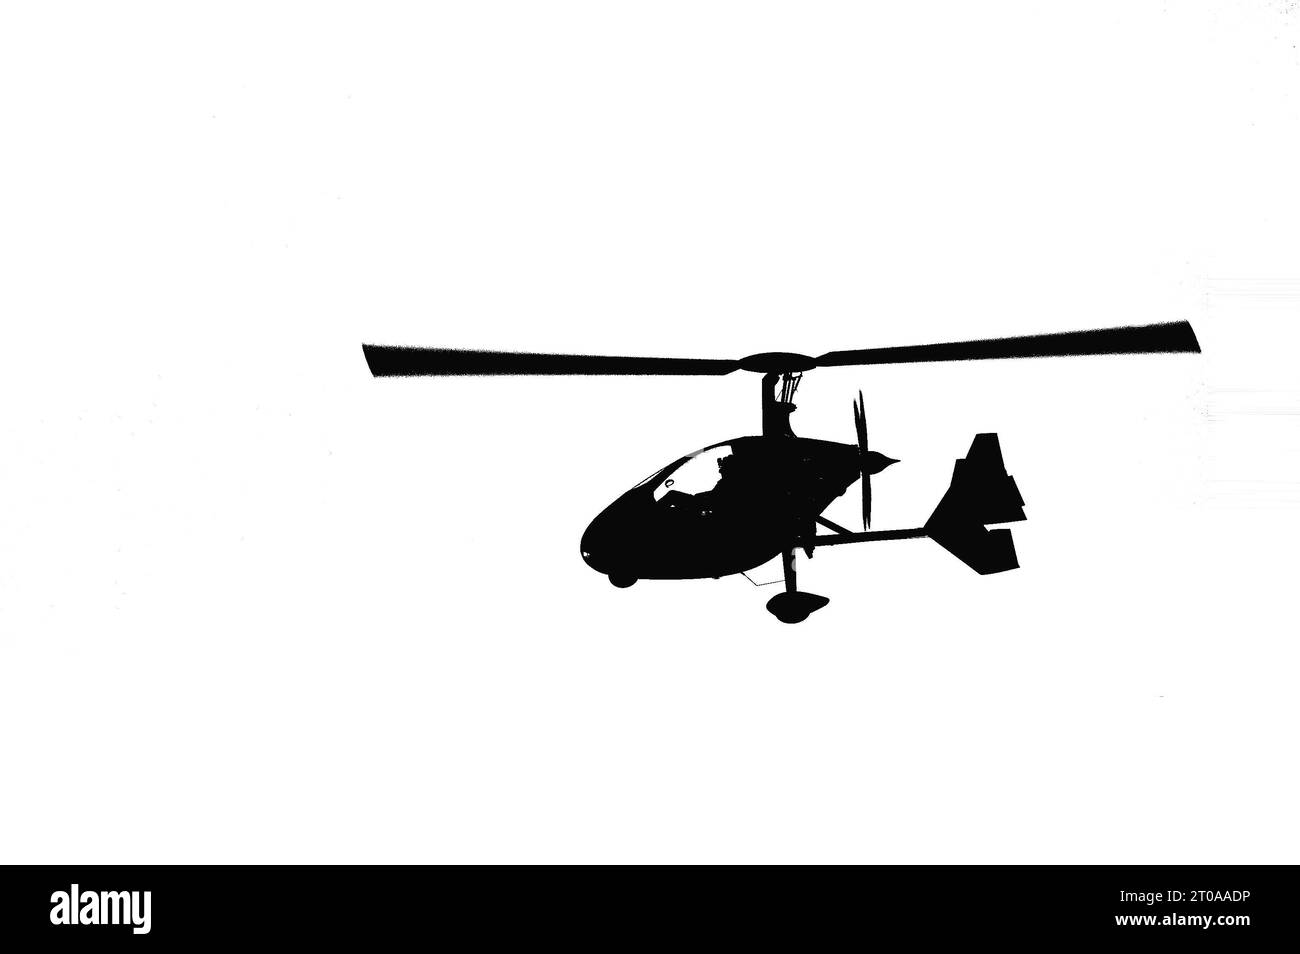 Graffiti style illustration of isolated helicopter autogiro (autogyro). Flying mean of transport, black and white cartoon. Stock Photo